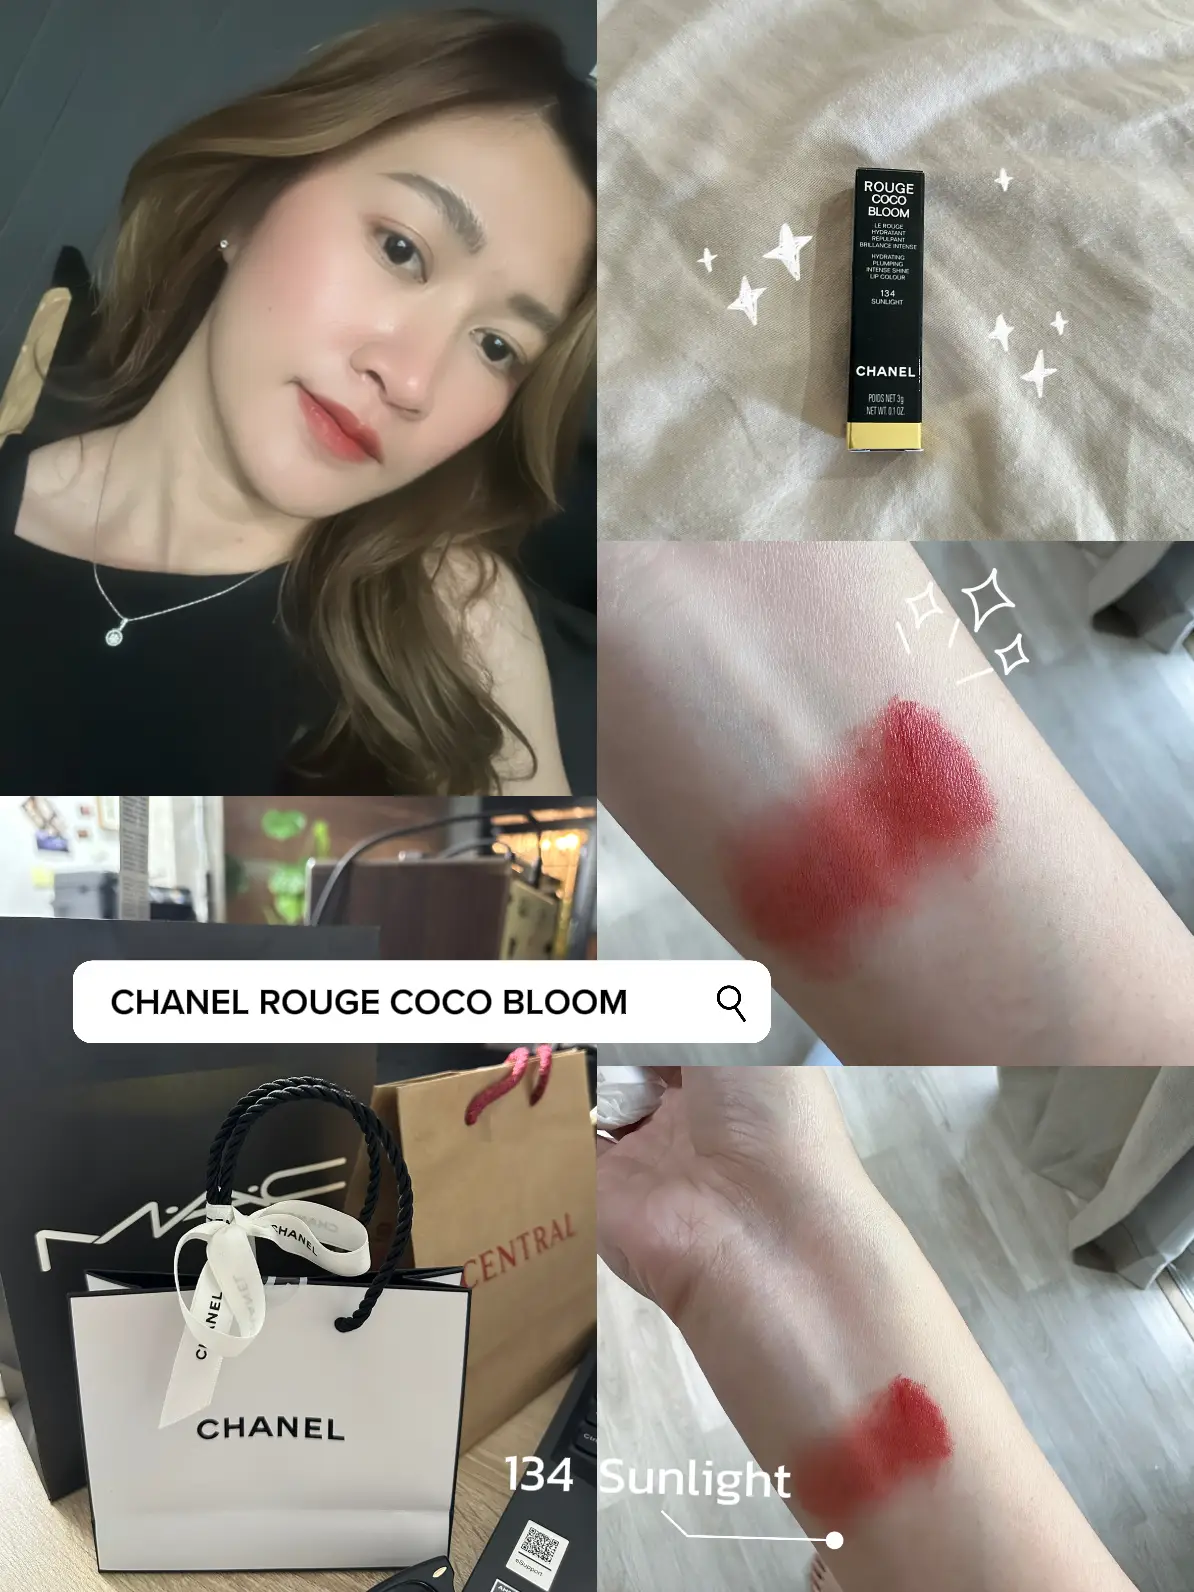 💄RED CHANEL COCO BLOOM 112, Gallery posted by fernwasine